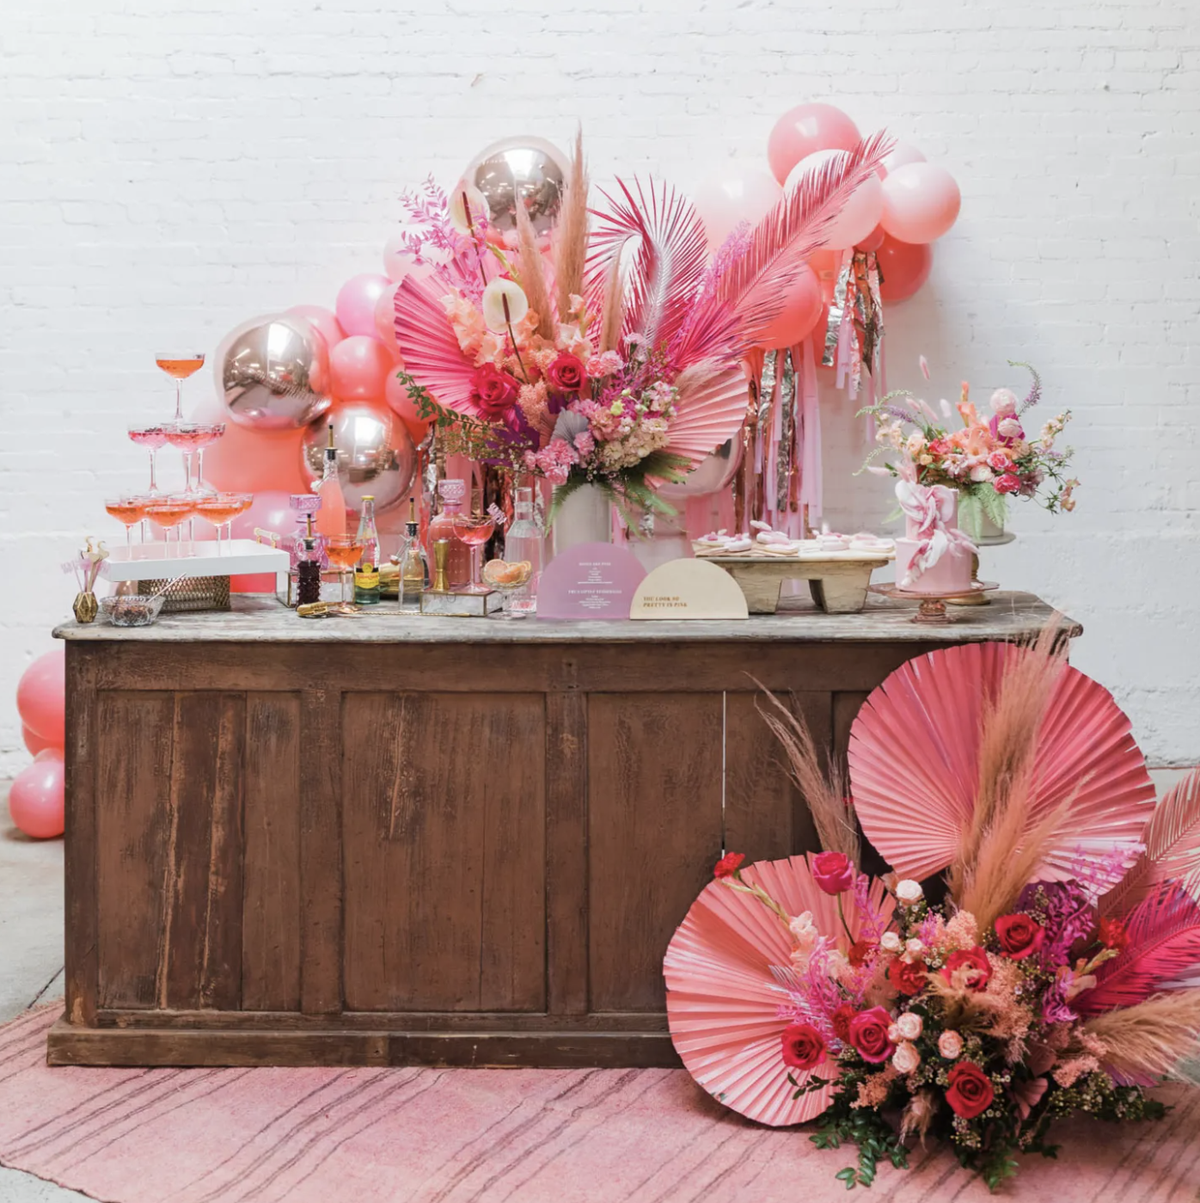 12 Bridal Shower Themes To Spoil Your